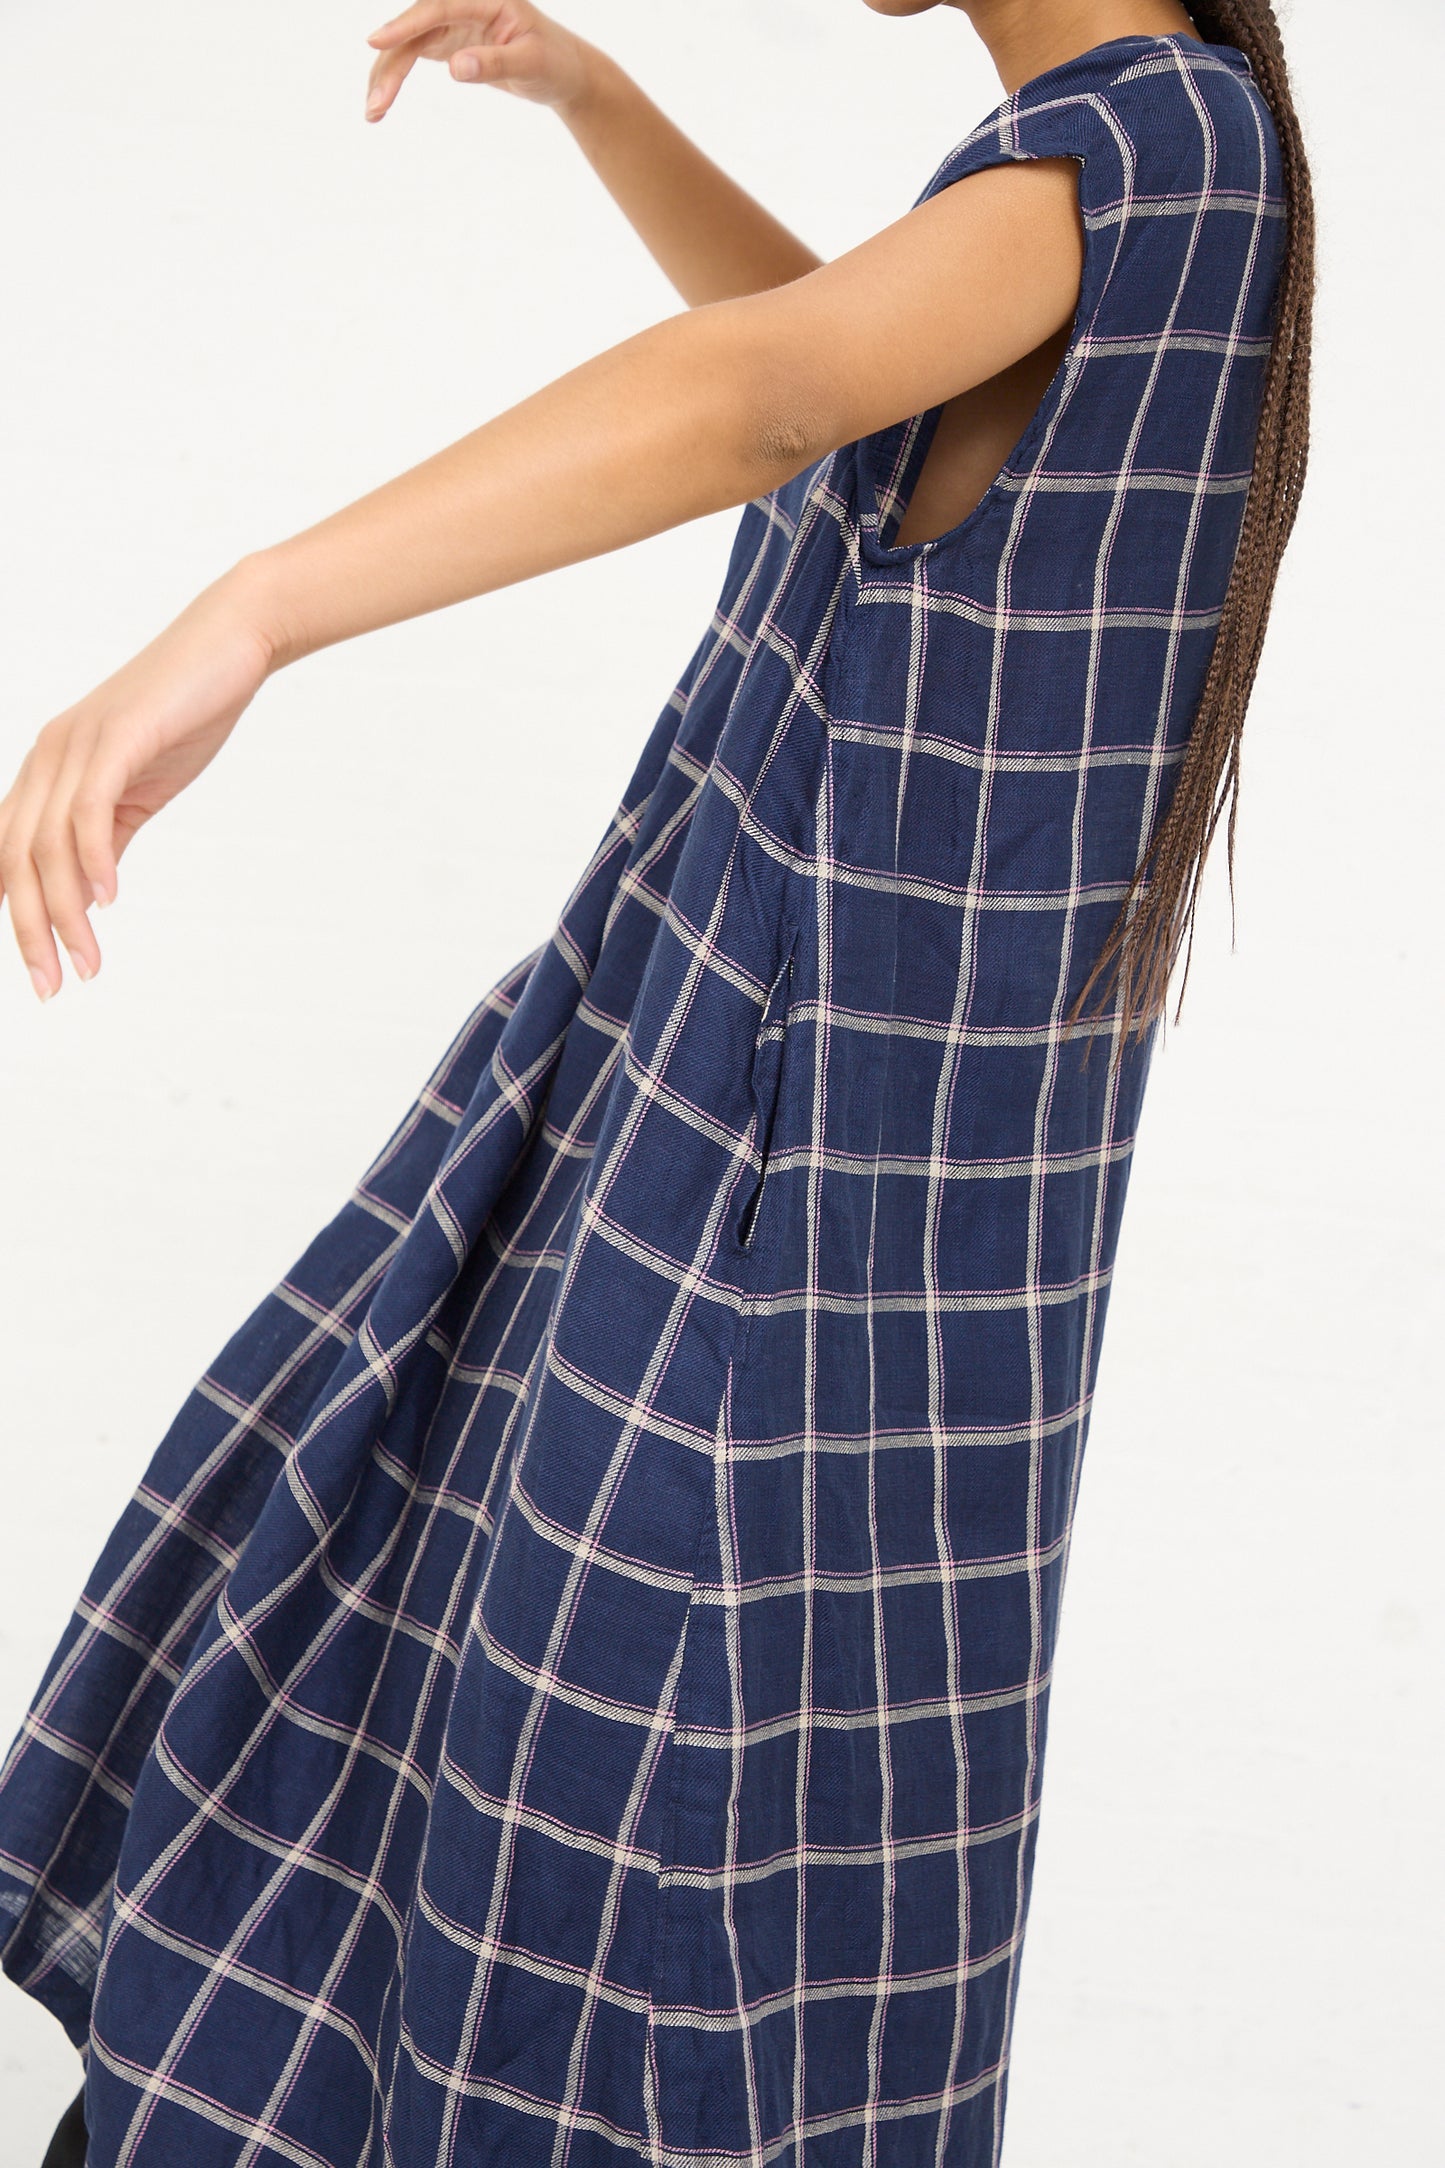 Woman modeling an Ichi Antiquités navy check linen dress with one arm extended.